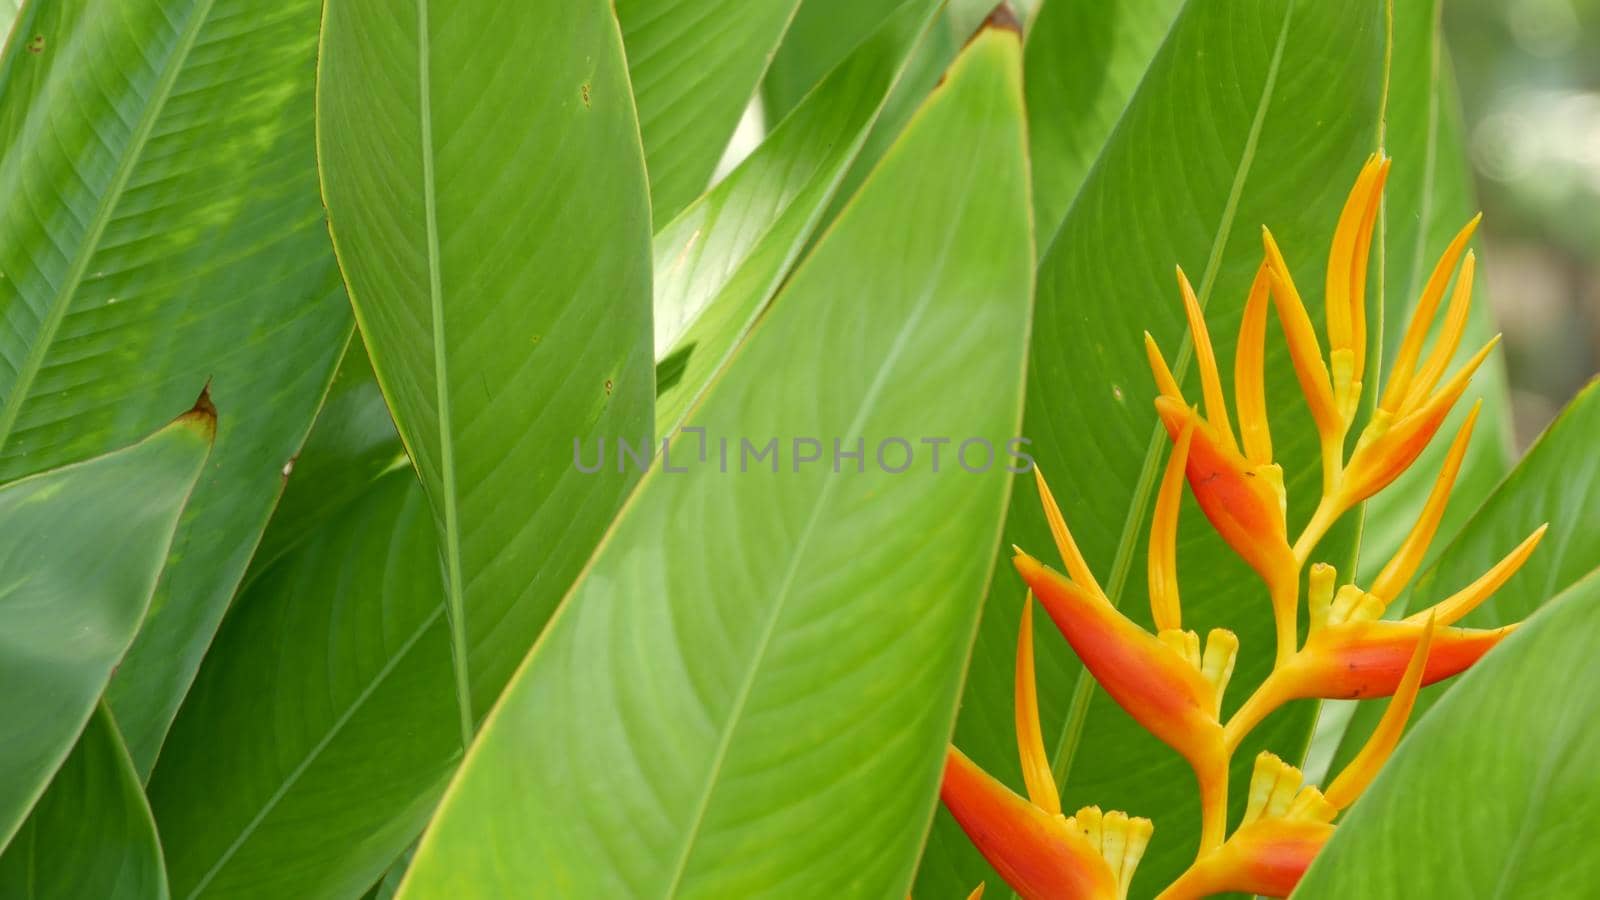 Blurred close up macro of colorful tropical flower in spring garden with tender petals among sunny lush foliage. Abstract natural exotic background with copy space. Floral blossom and leaves pattern by DogoraSun